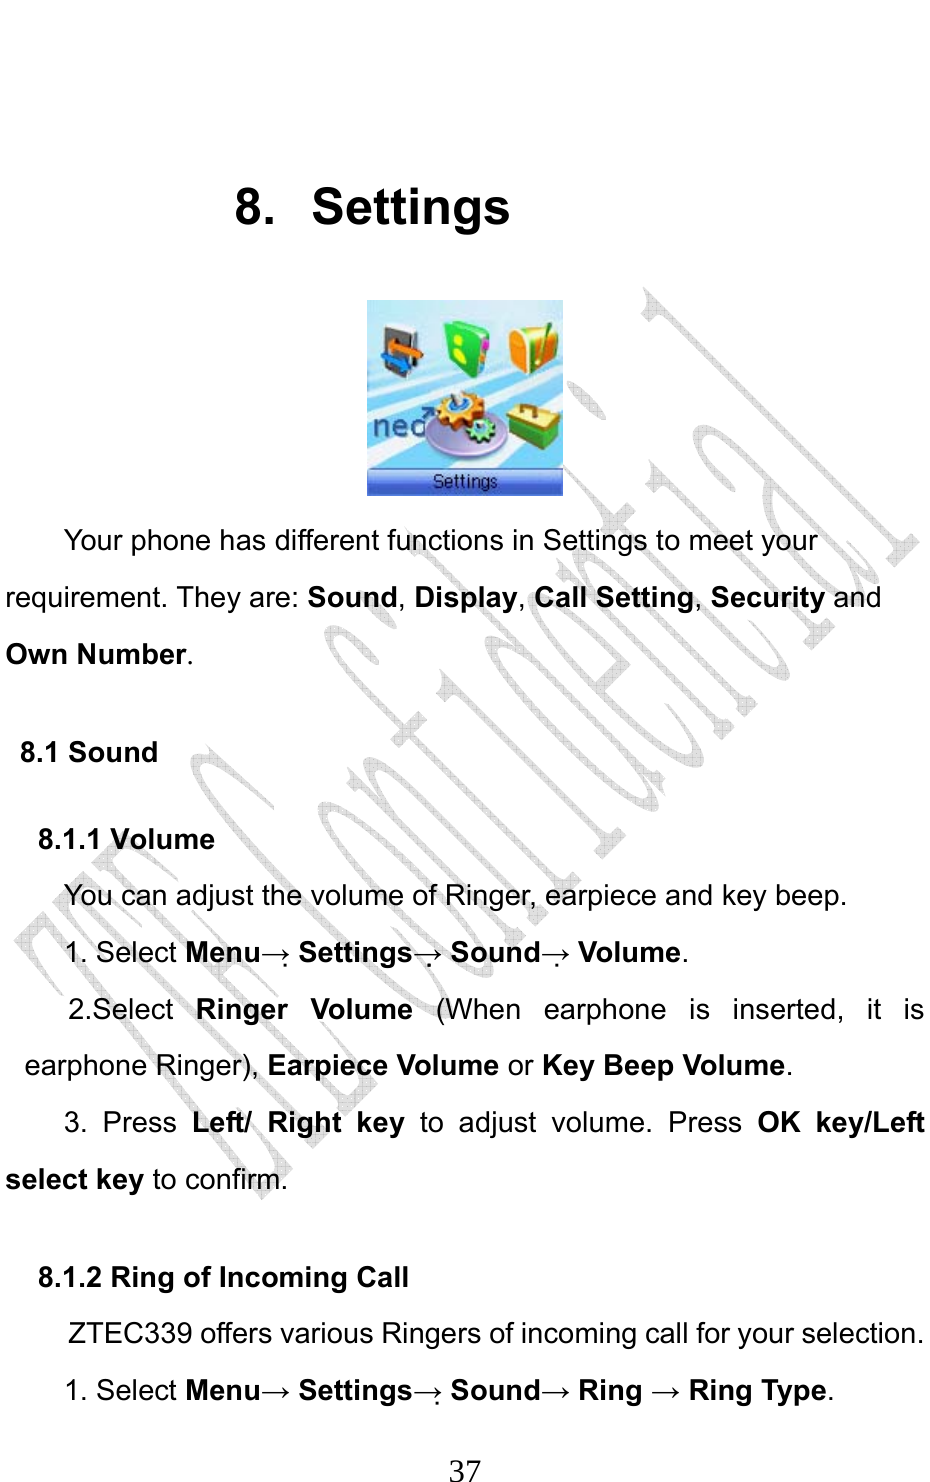                              37 8. Settings  Your phone has different functions in Settings to meet your requirement. They are: Sound, Display, Call Setting, Security and Own Number. 8.1 Sound 8.1.1 Volume You can adjust the volume of Ringer, earpiece and key beep. 1. Select Menu→ Settings→ Sound→ Volume. 2.Select  Ringer Volume (When earphone is inserted, it is earphone Ringer), Earpiece Volume or Key Beep Volume. 3. Press Left/ Right key to adjust volume. Press OK key/Left select key to confirm. 8.1.2 Ring of Incoming Call ZTEC339 offers various Ringers of incoming call for your selection.   1. Select Menu→ Settings→ Sound→ Ring → Ring Type.  